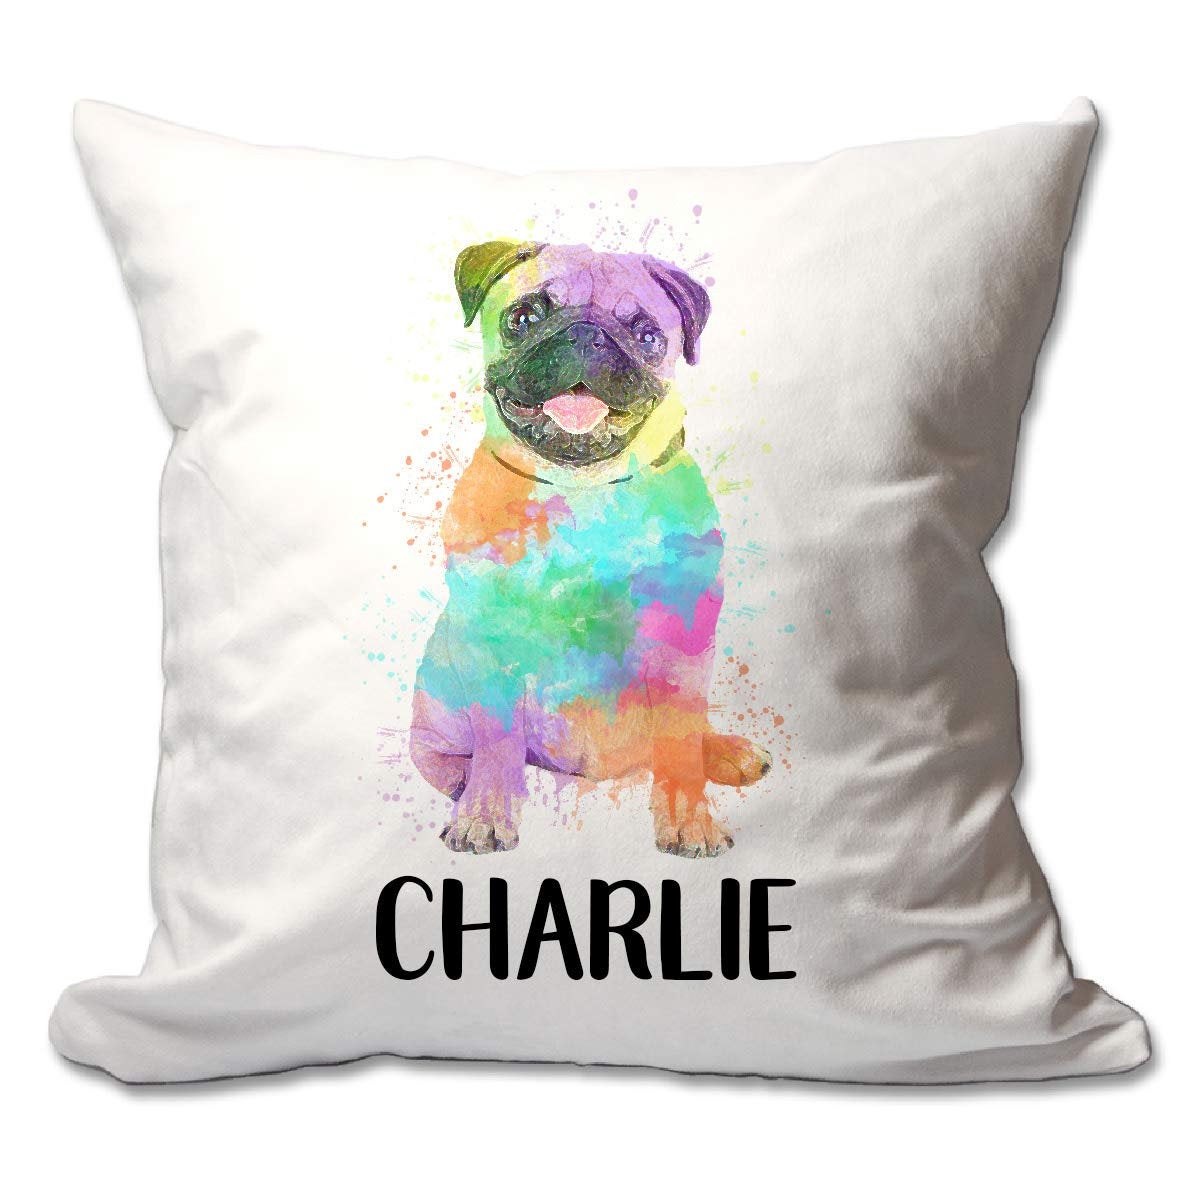 Personalized Watercolor Pug Throw Pillow  - Cover Only OR Cover with Insert